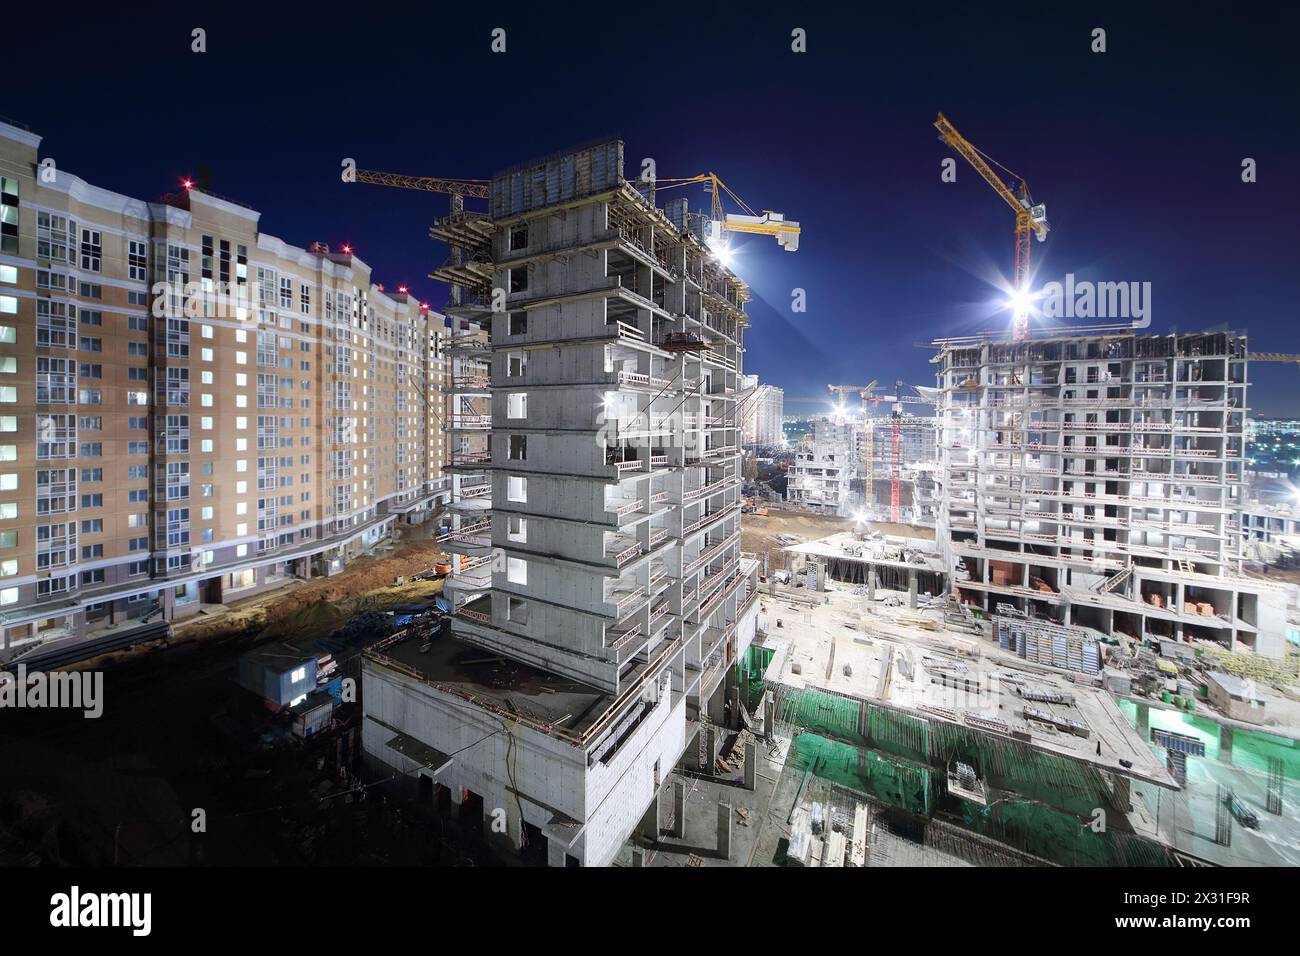 Lit high multi-storey buildings under construction and cranes at dark night. Stock Photo